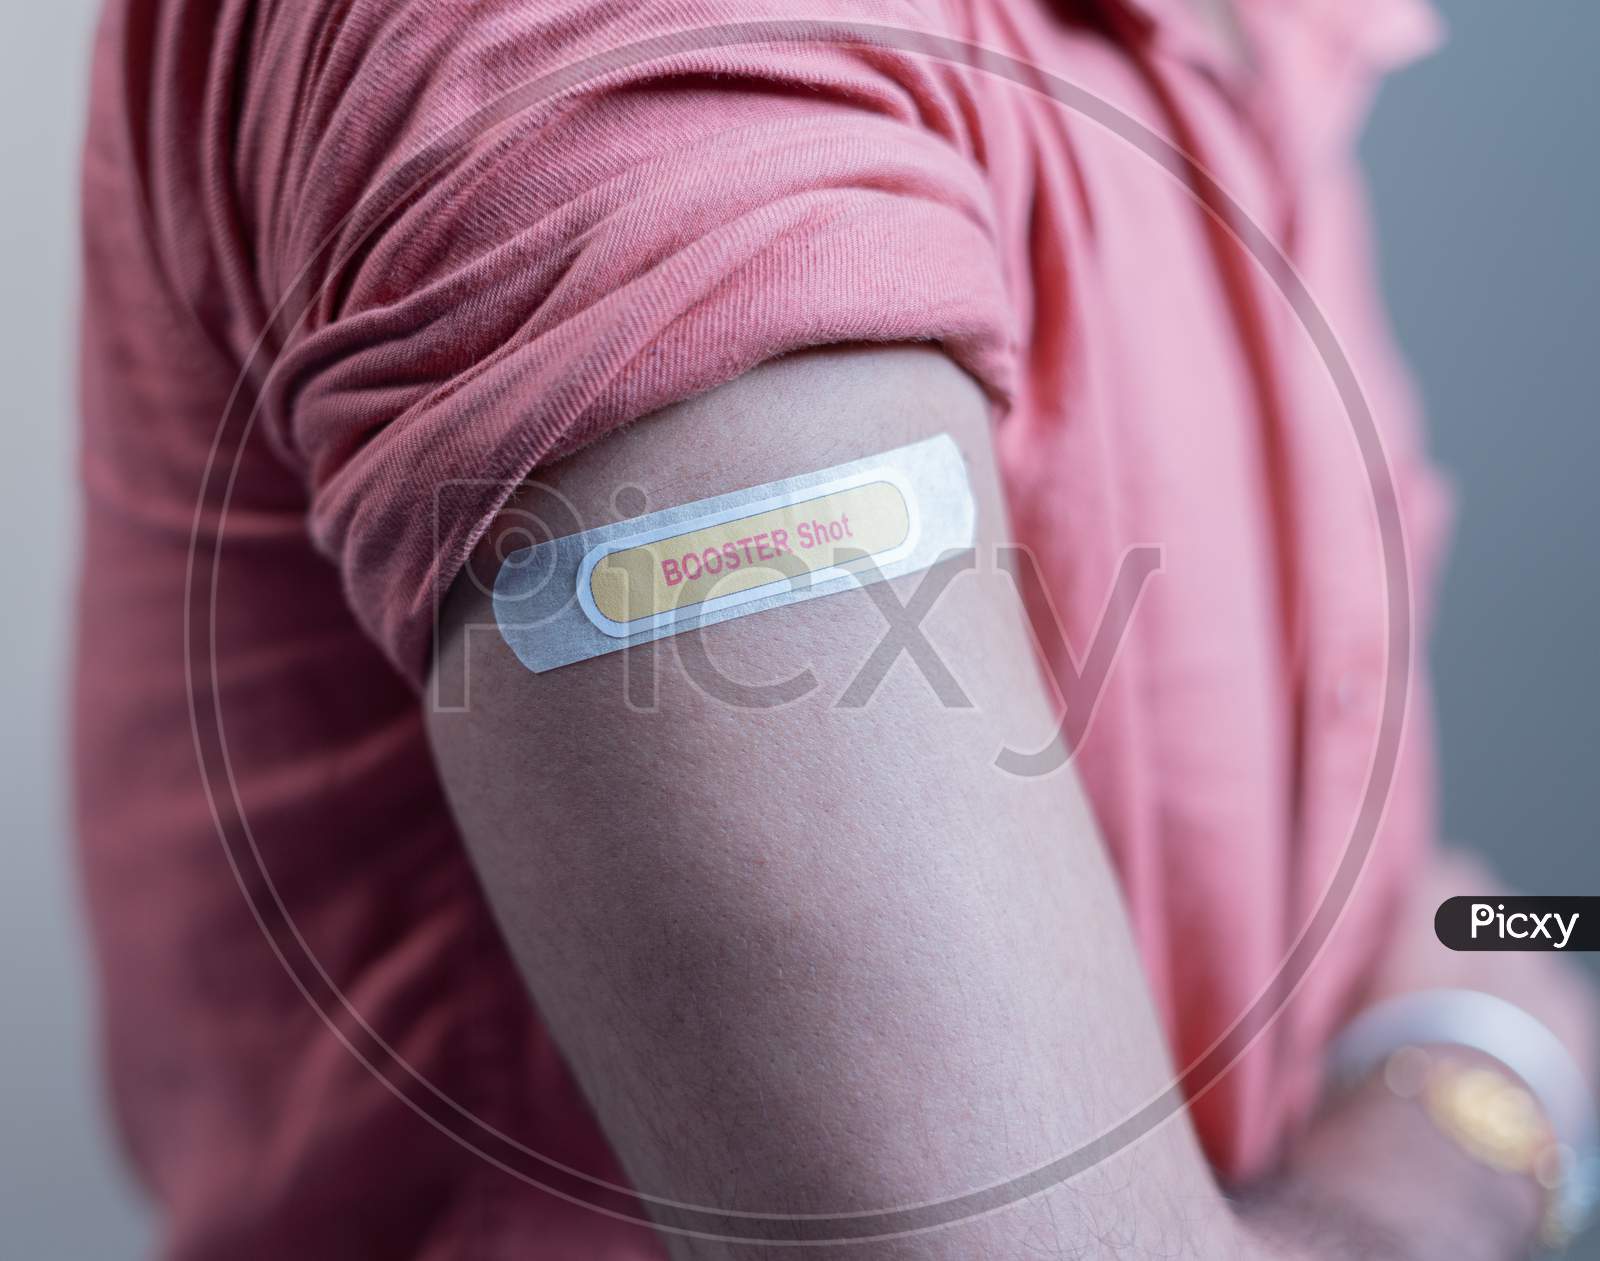 Covid-19 Or Coronavirus Vaccinated Shoulder With Booster Shot Sticker - Concept Of Coronavirus 3Rd Dose Vaccination.